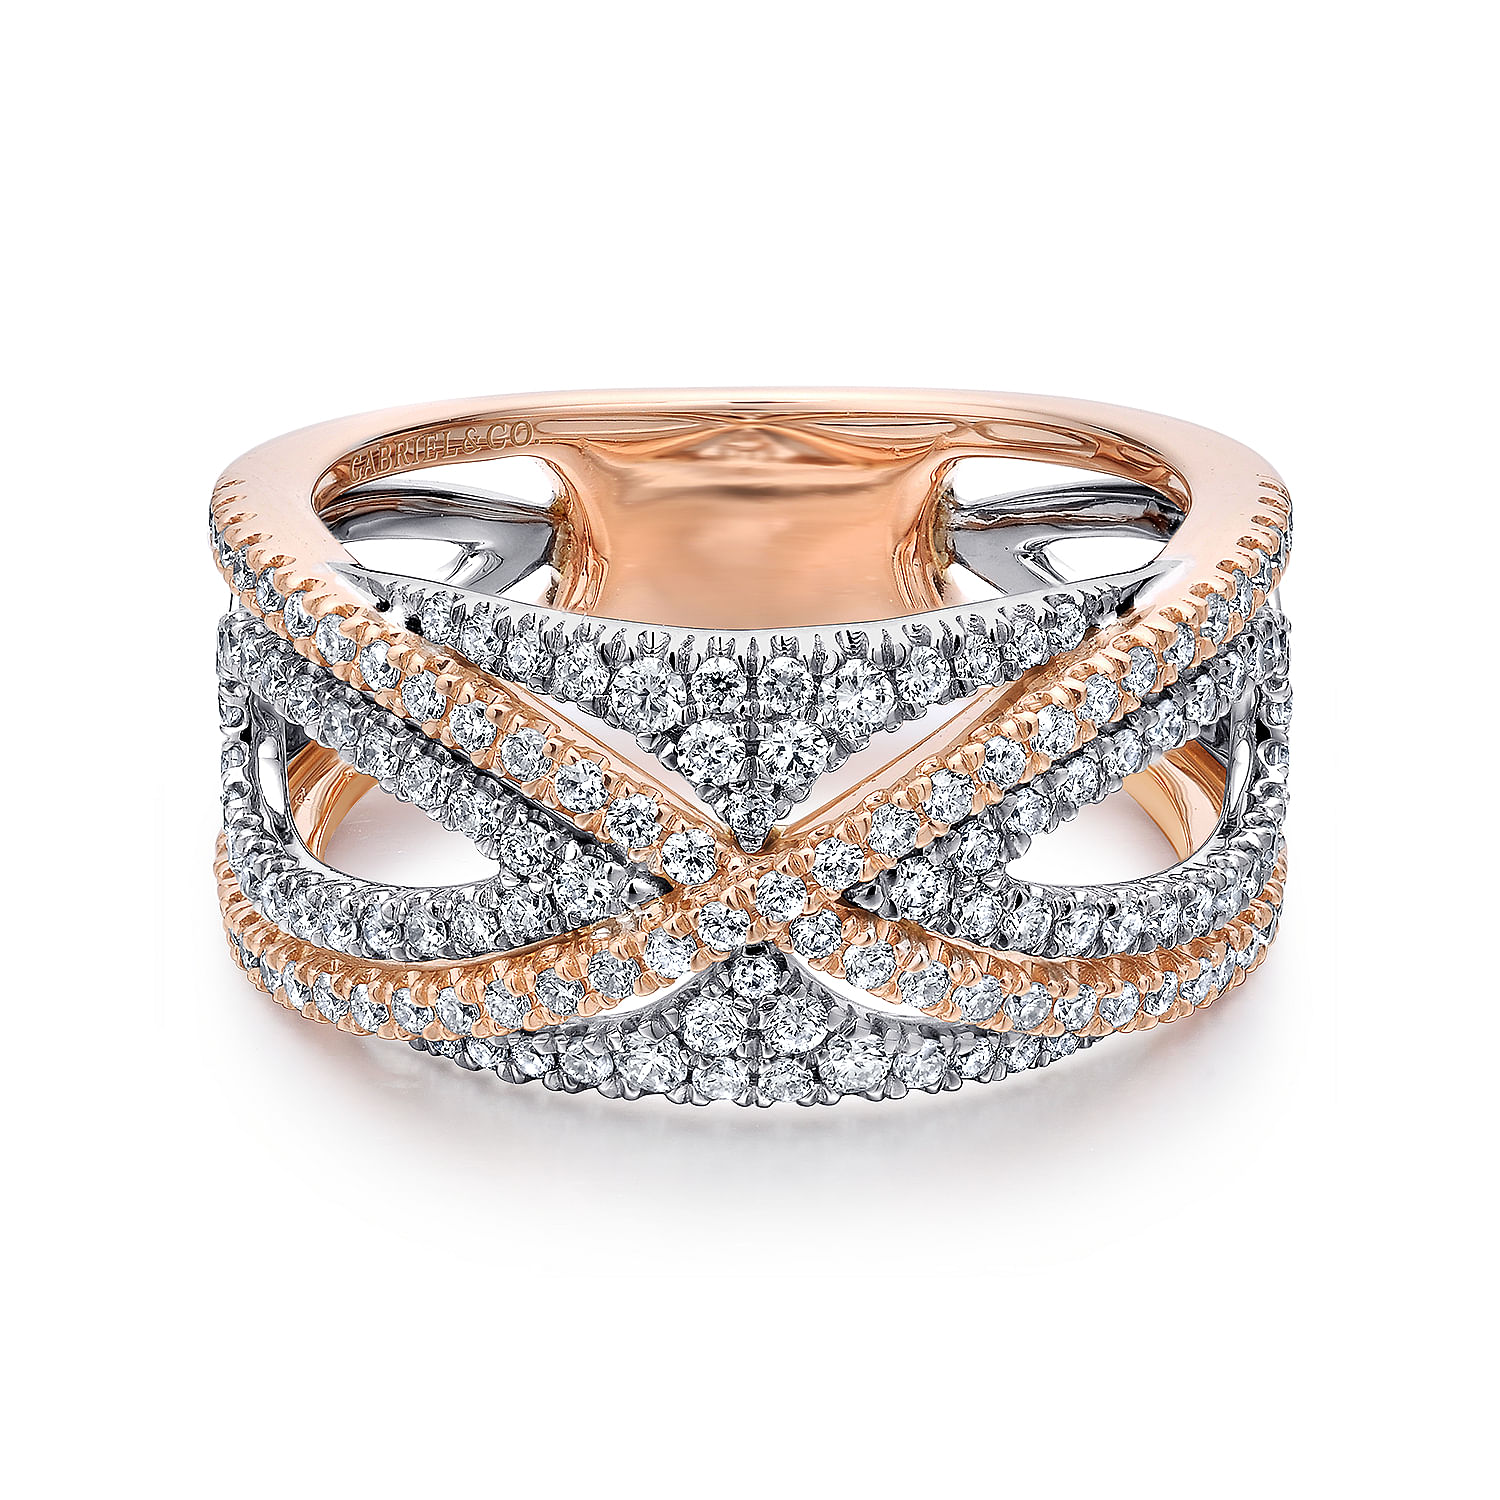 Wide 14K White and Rose Gold French Pavé Set Diamond Anniversary Band